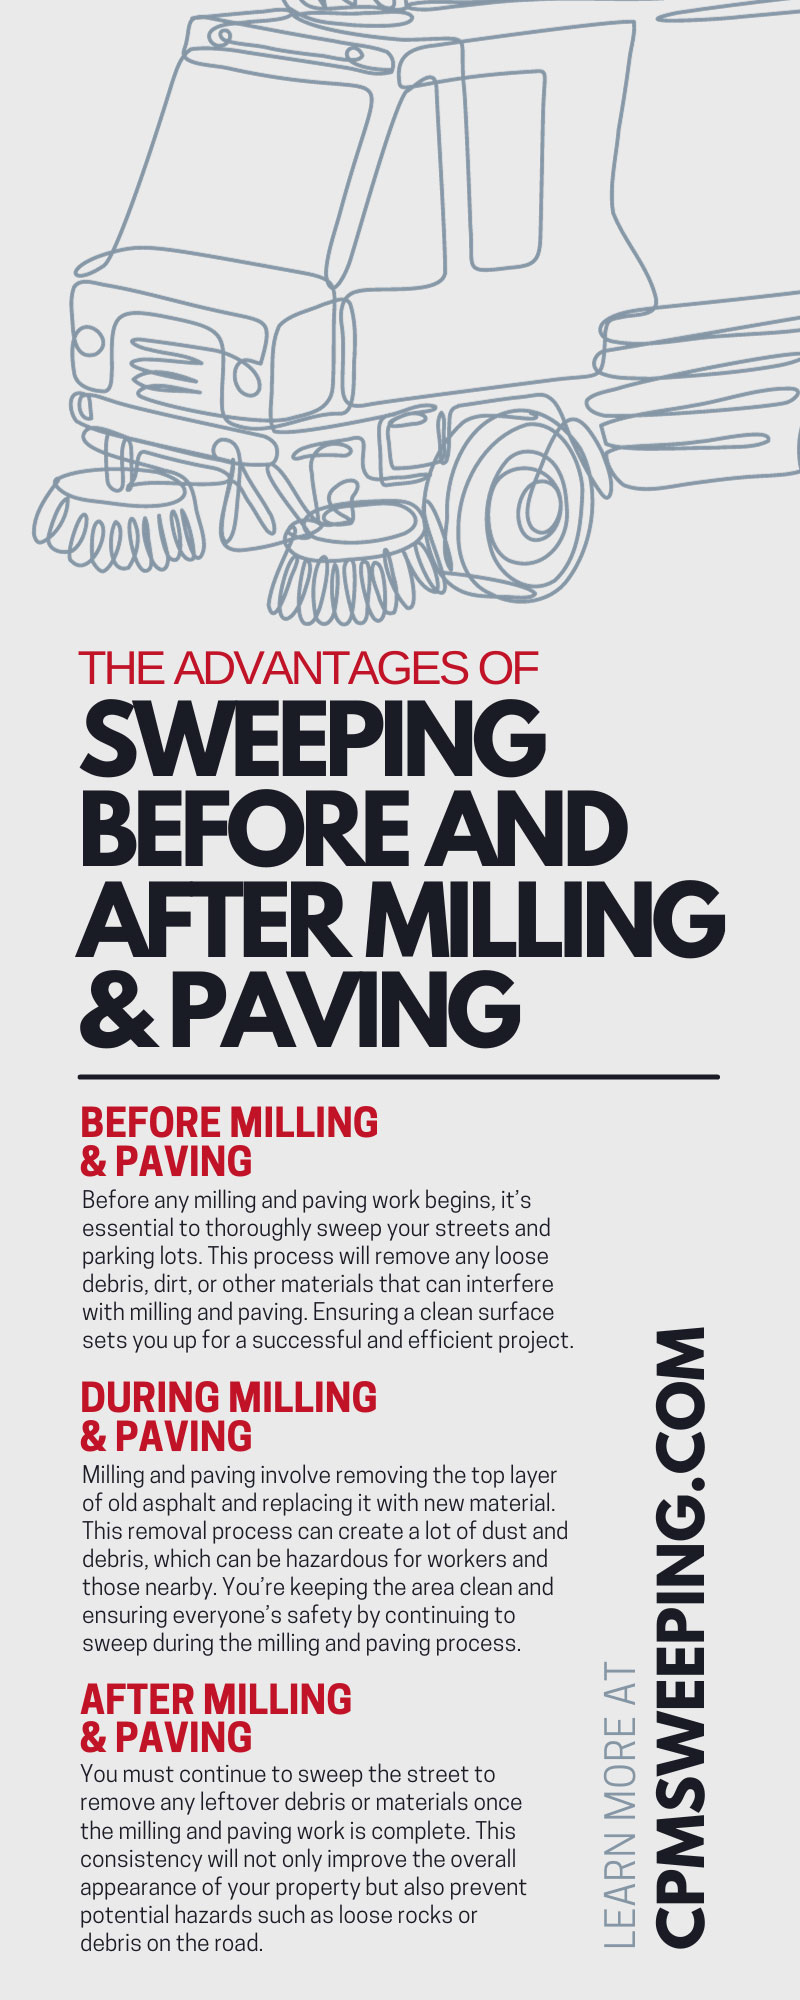 The Advantages of Sweeping Before and After Milling & Paving
